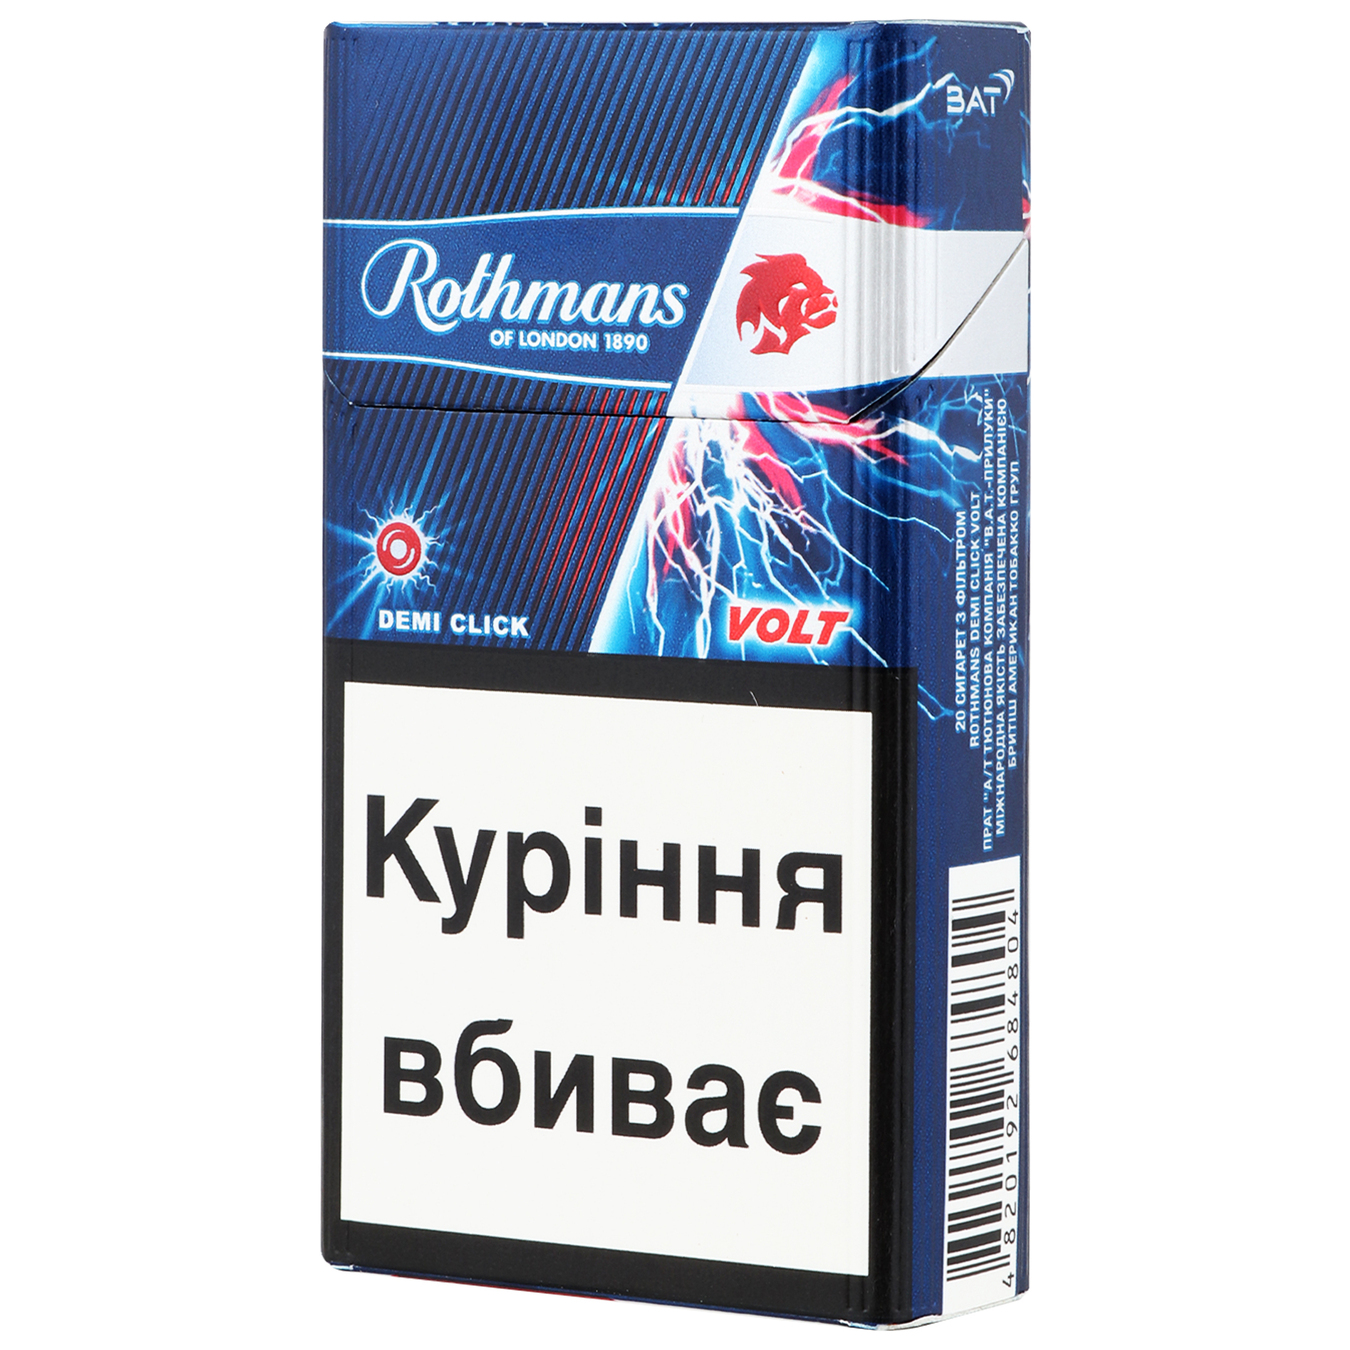 Cigarettes Rothmans Demi Click Volt 20pcs (the price is without excise tax) 2